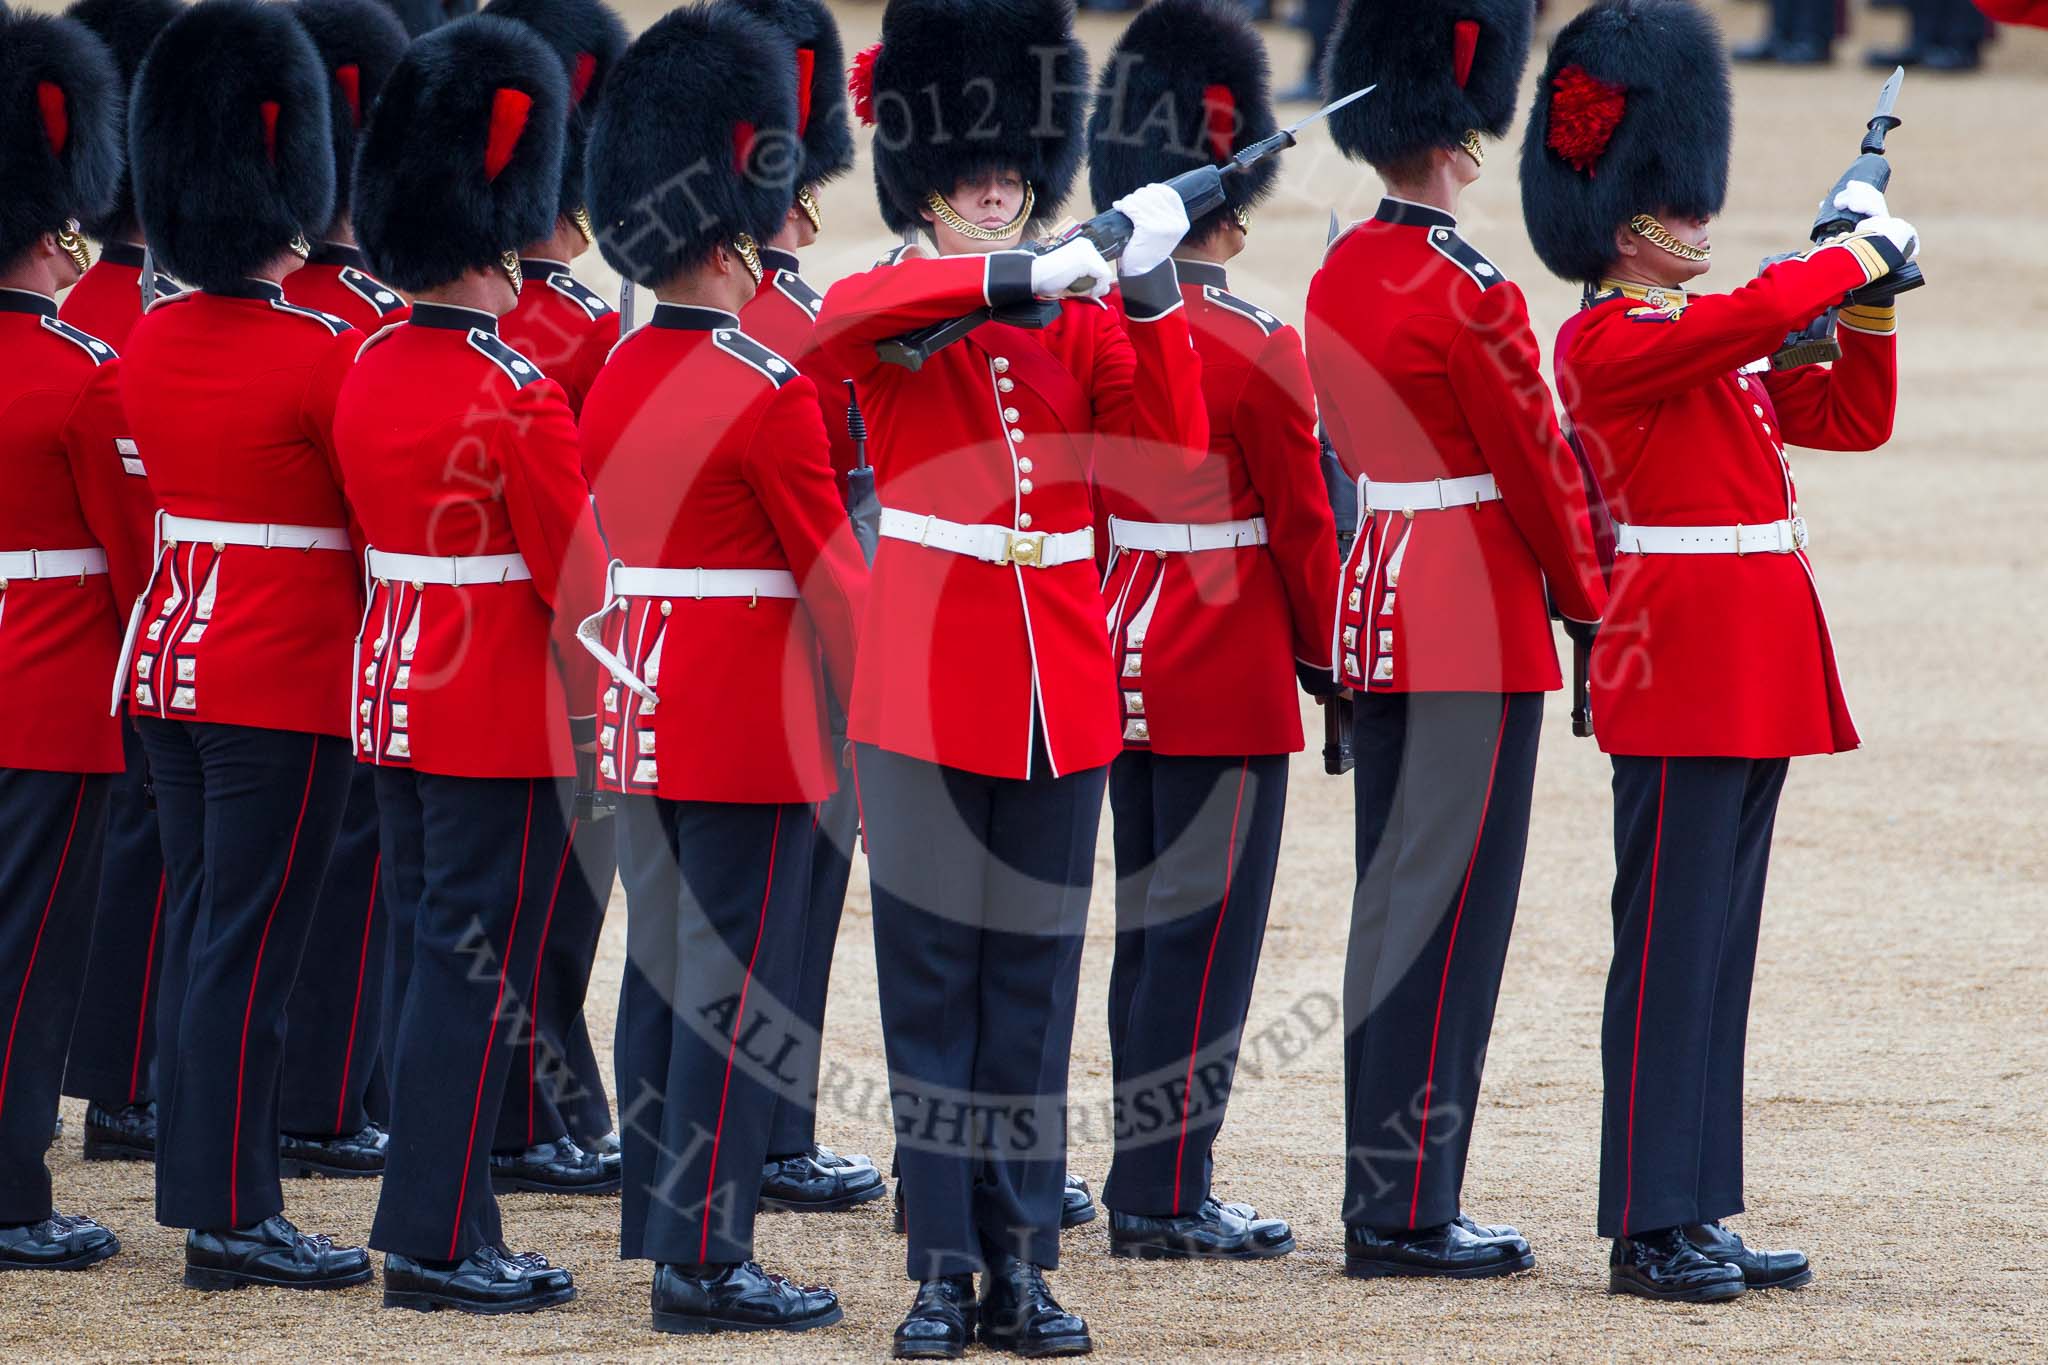 Trooping the Colour 2012: No. 1 Guard, now the Escort to the Colour..
Horse Guards Parade, Westminster,
London SW1,

United Kingdom,
on 16 June 2012 at 11:22, image #313